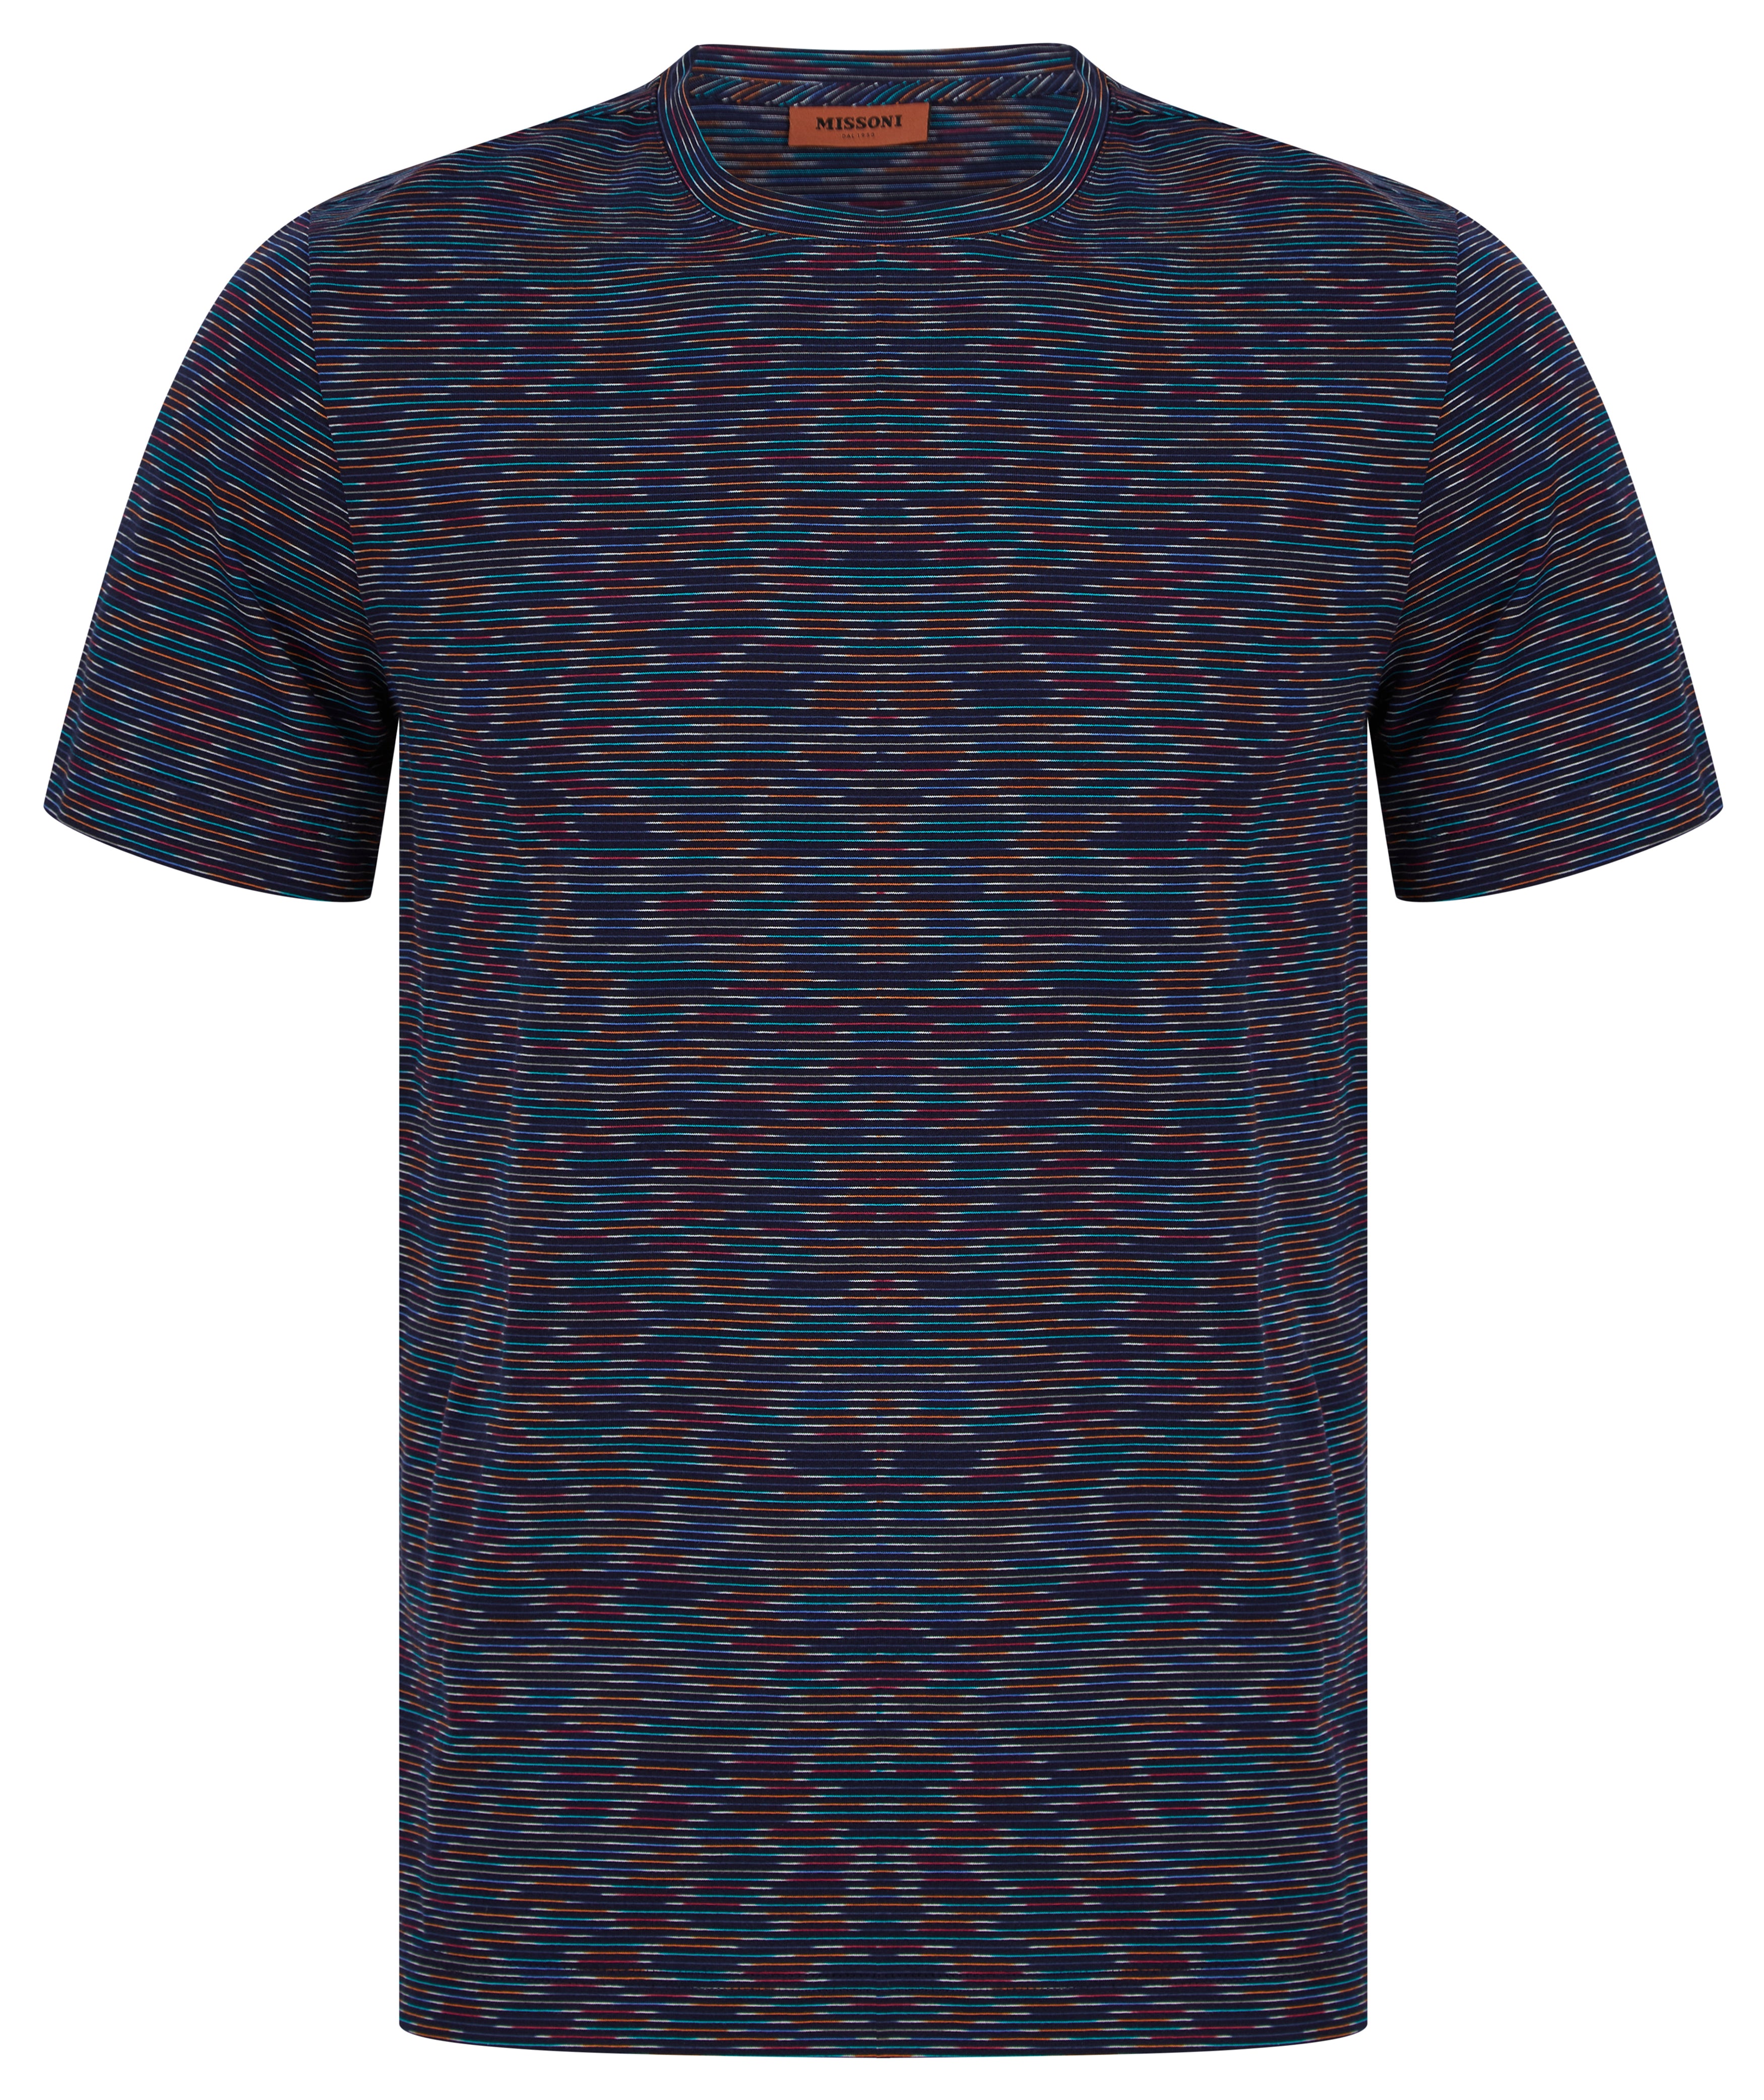 Load image into Gallery viewer, Missoni Multi Stripe T Shirt Navy
